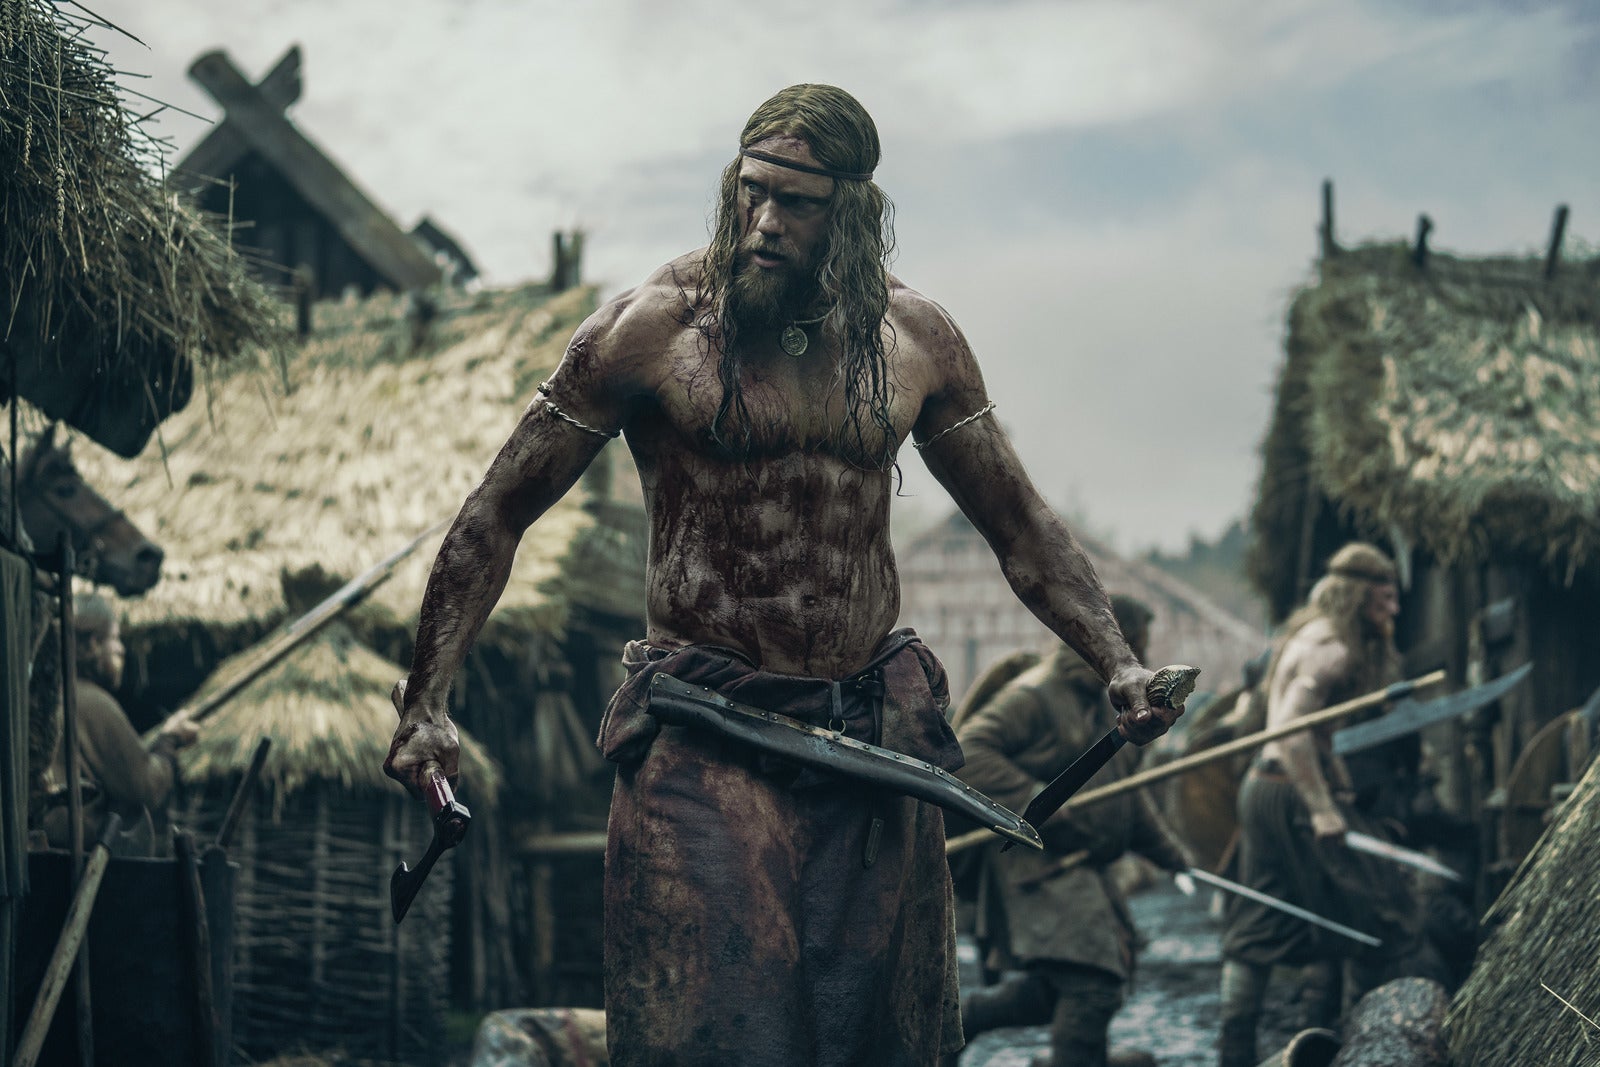 Alexander Skarsgard stands, shirtless and impossibly, steroidally ripped, an axe in each hand, blood on his chest, amid a medieval village